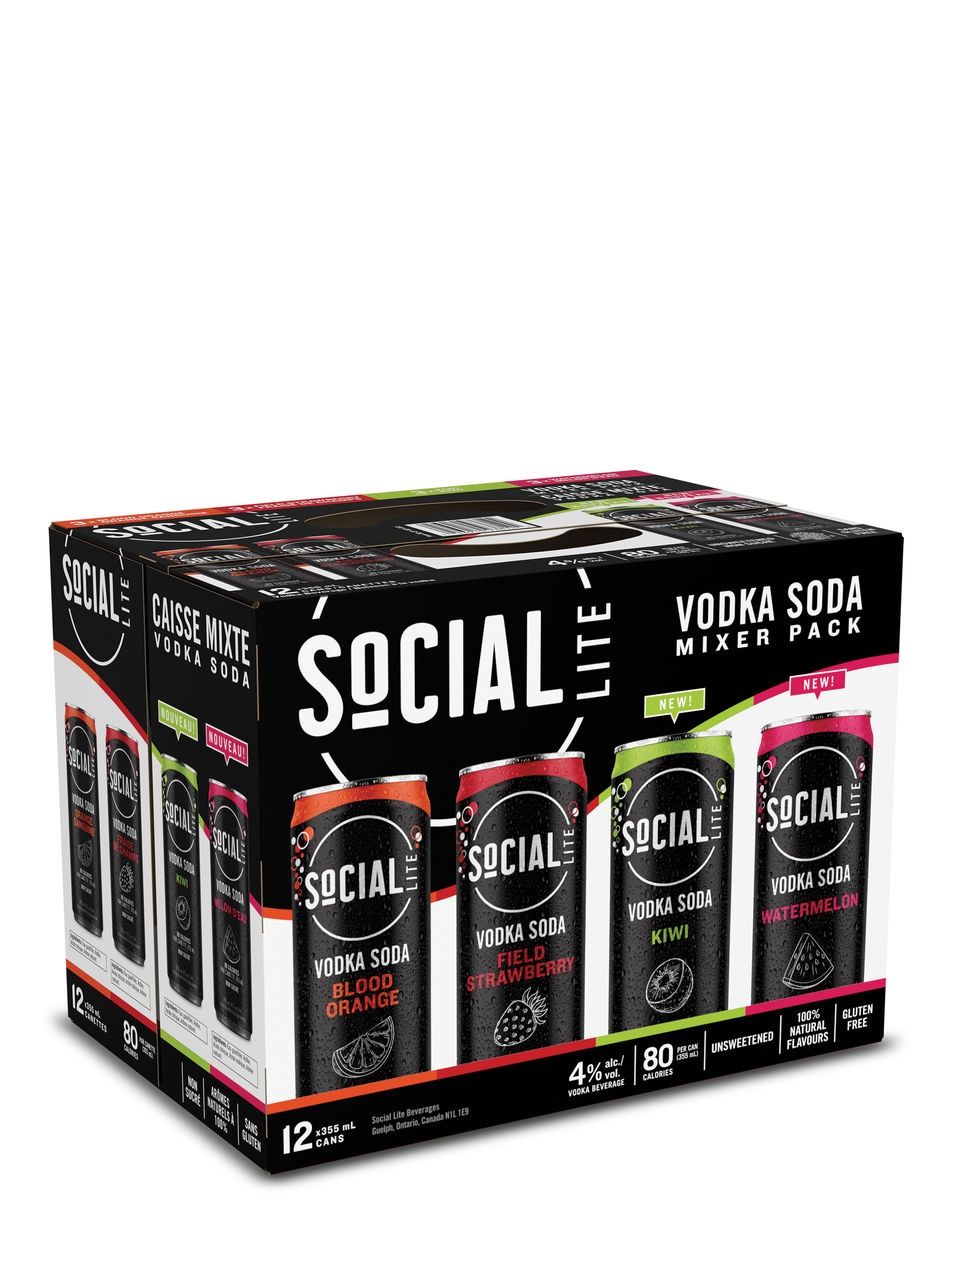 SOCIAL LITE VODKA SODA MIXED PACK, Size: 12 Cans